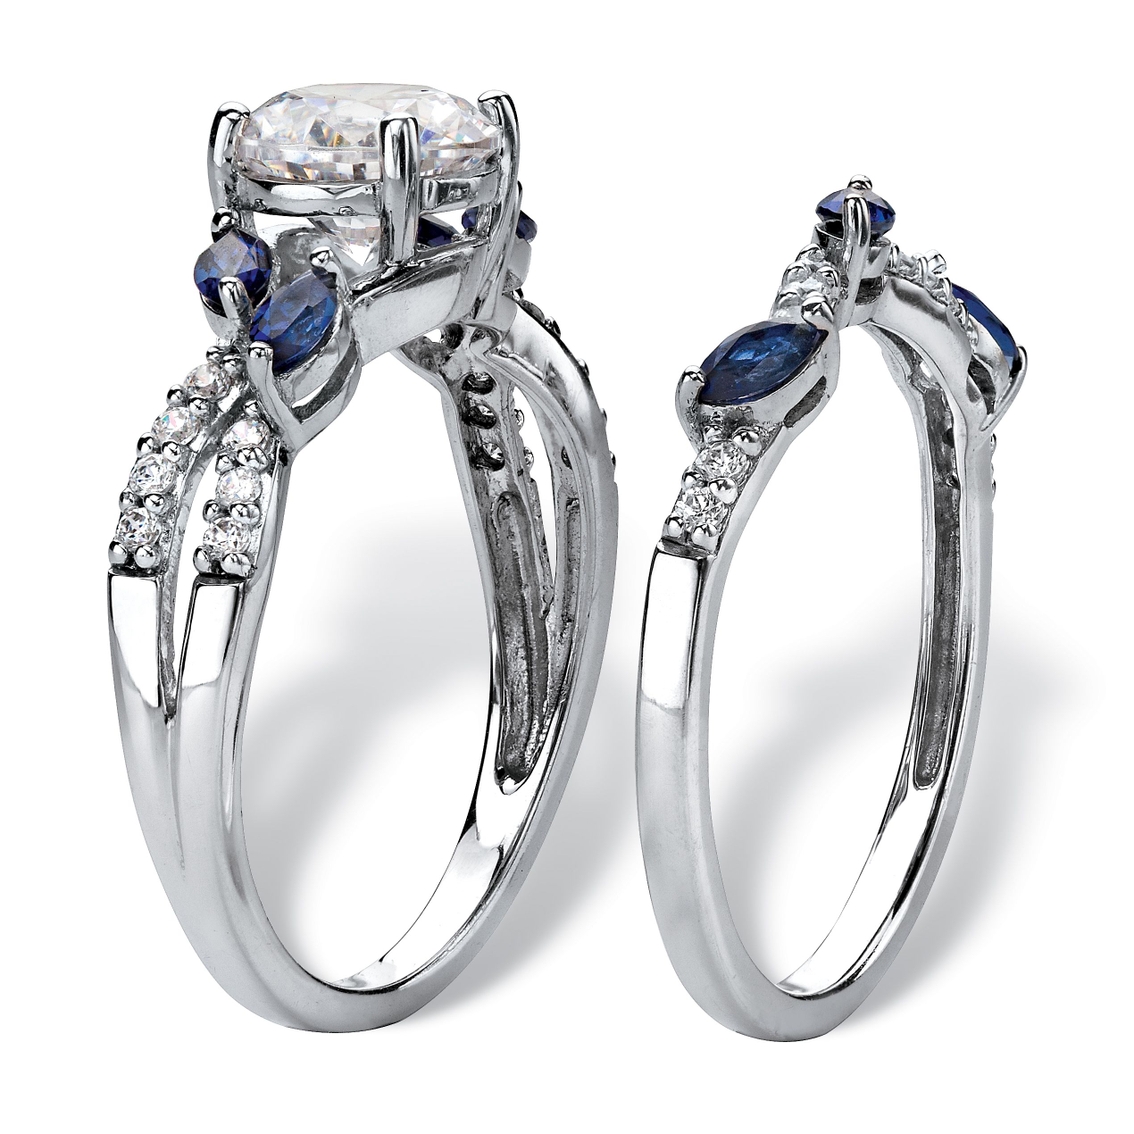 PalmBeach Platinum-plated Sterling CZ and Lab-Created Sapphire Wedding Ring Set - Image 2 of 5